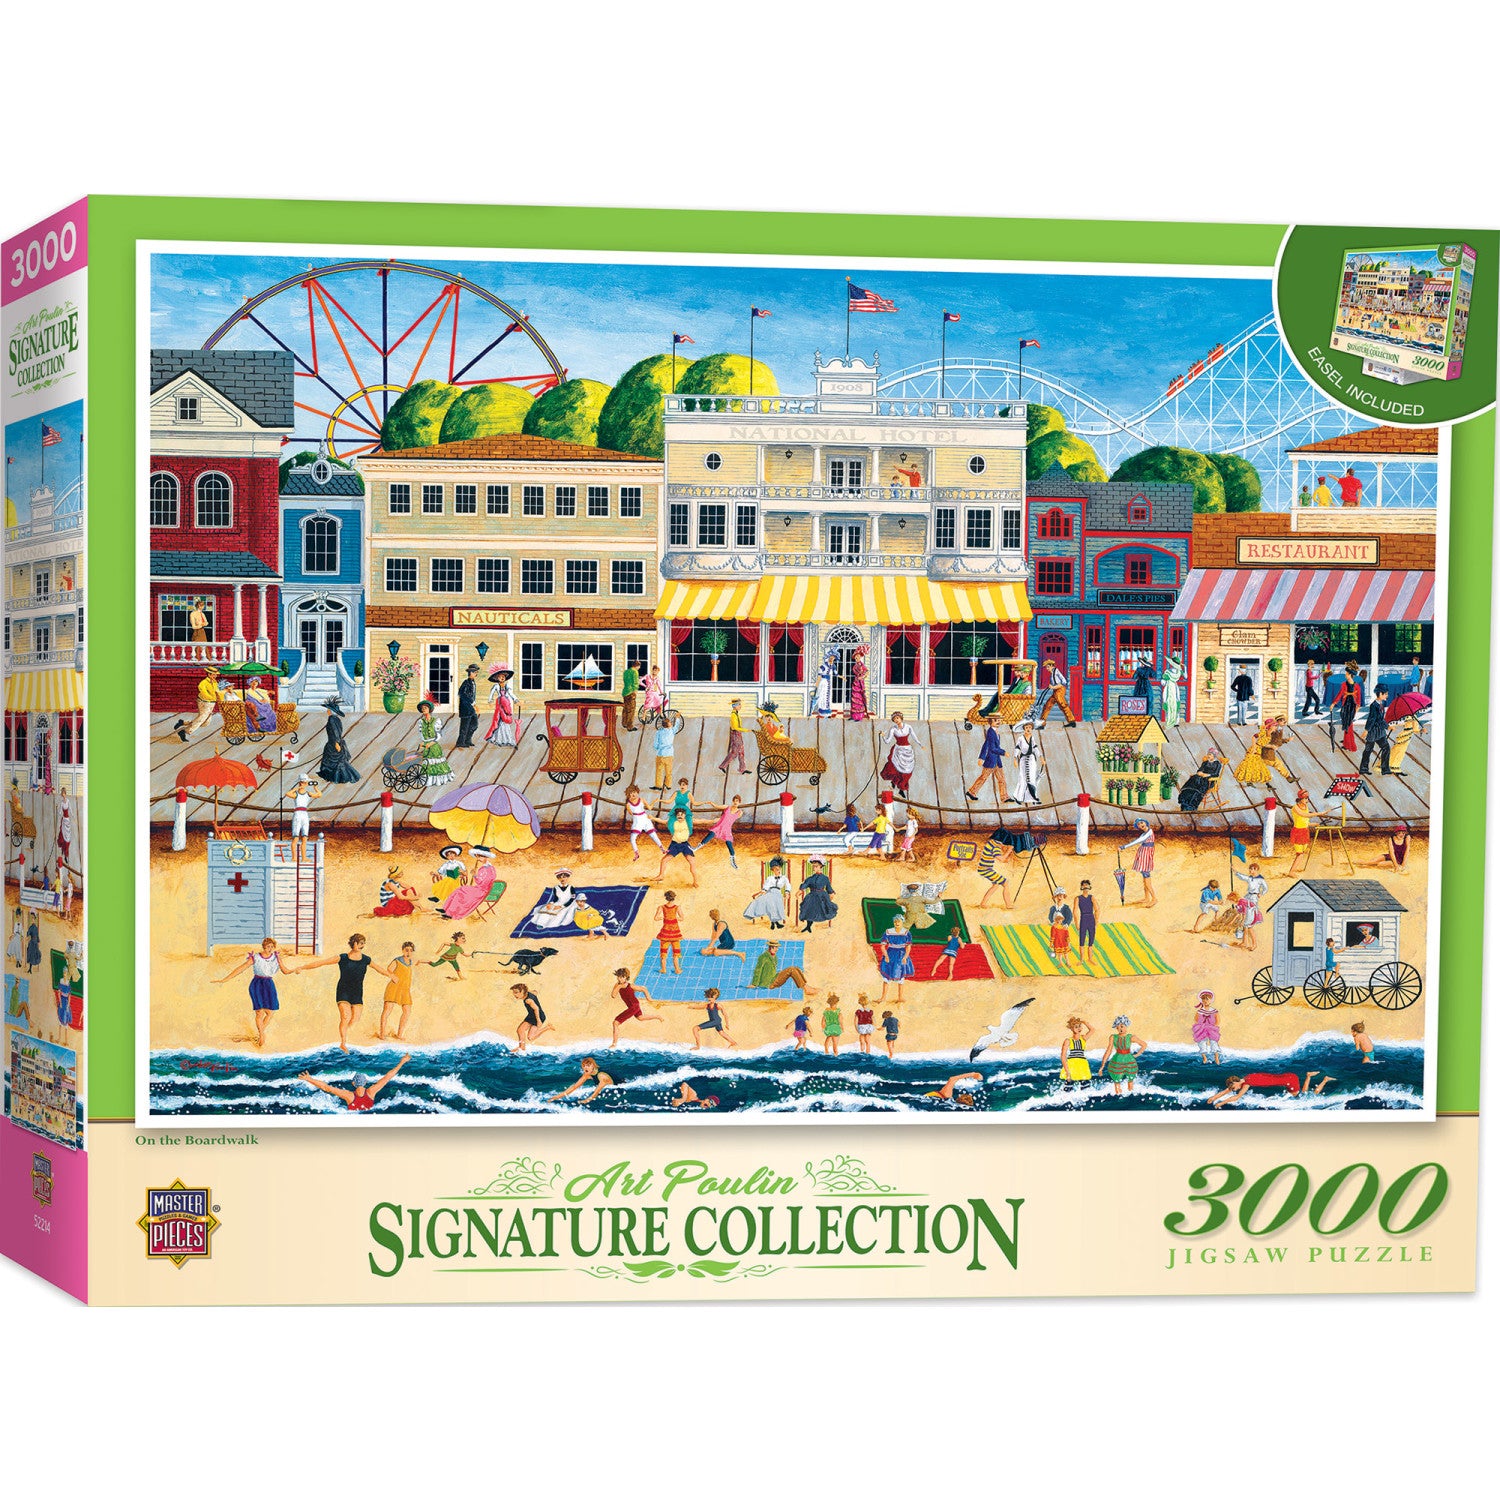 Signature Collection - On the Boardwalk 3000 Piece Jigsaw Puzzle - Flawed